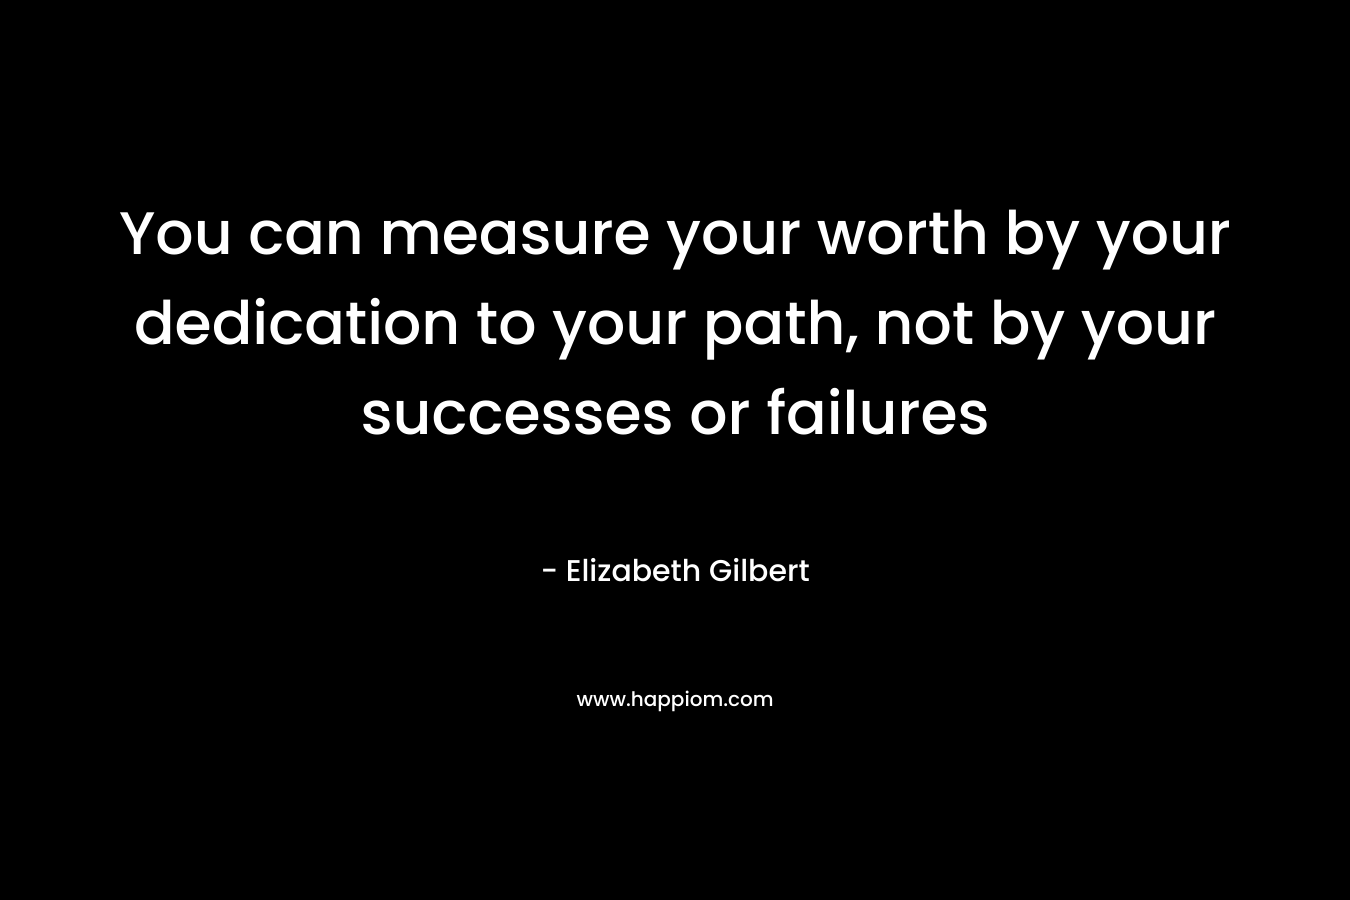 You can measure your worth by your dedication to your path, not by your successes or failures